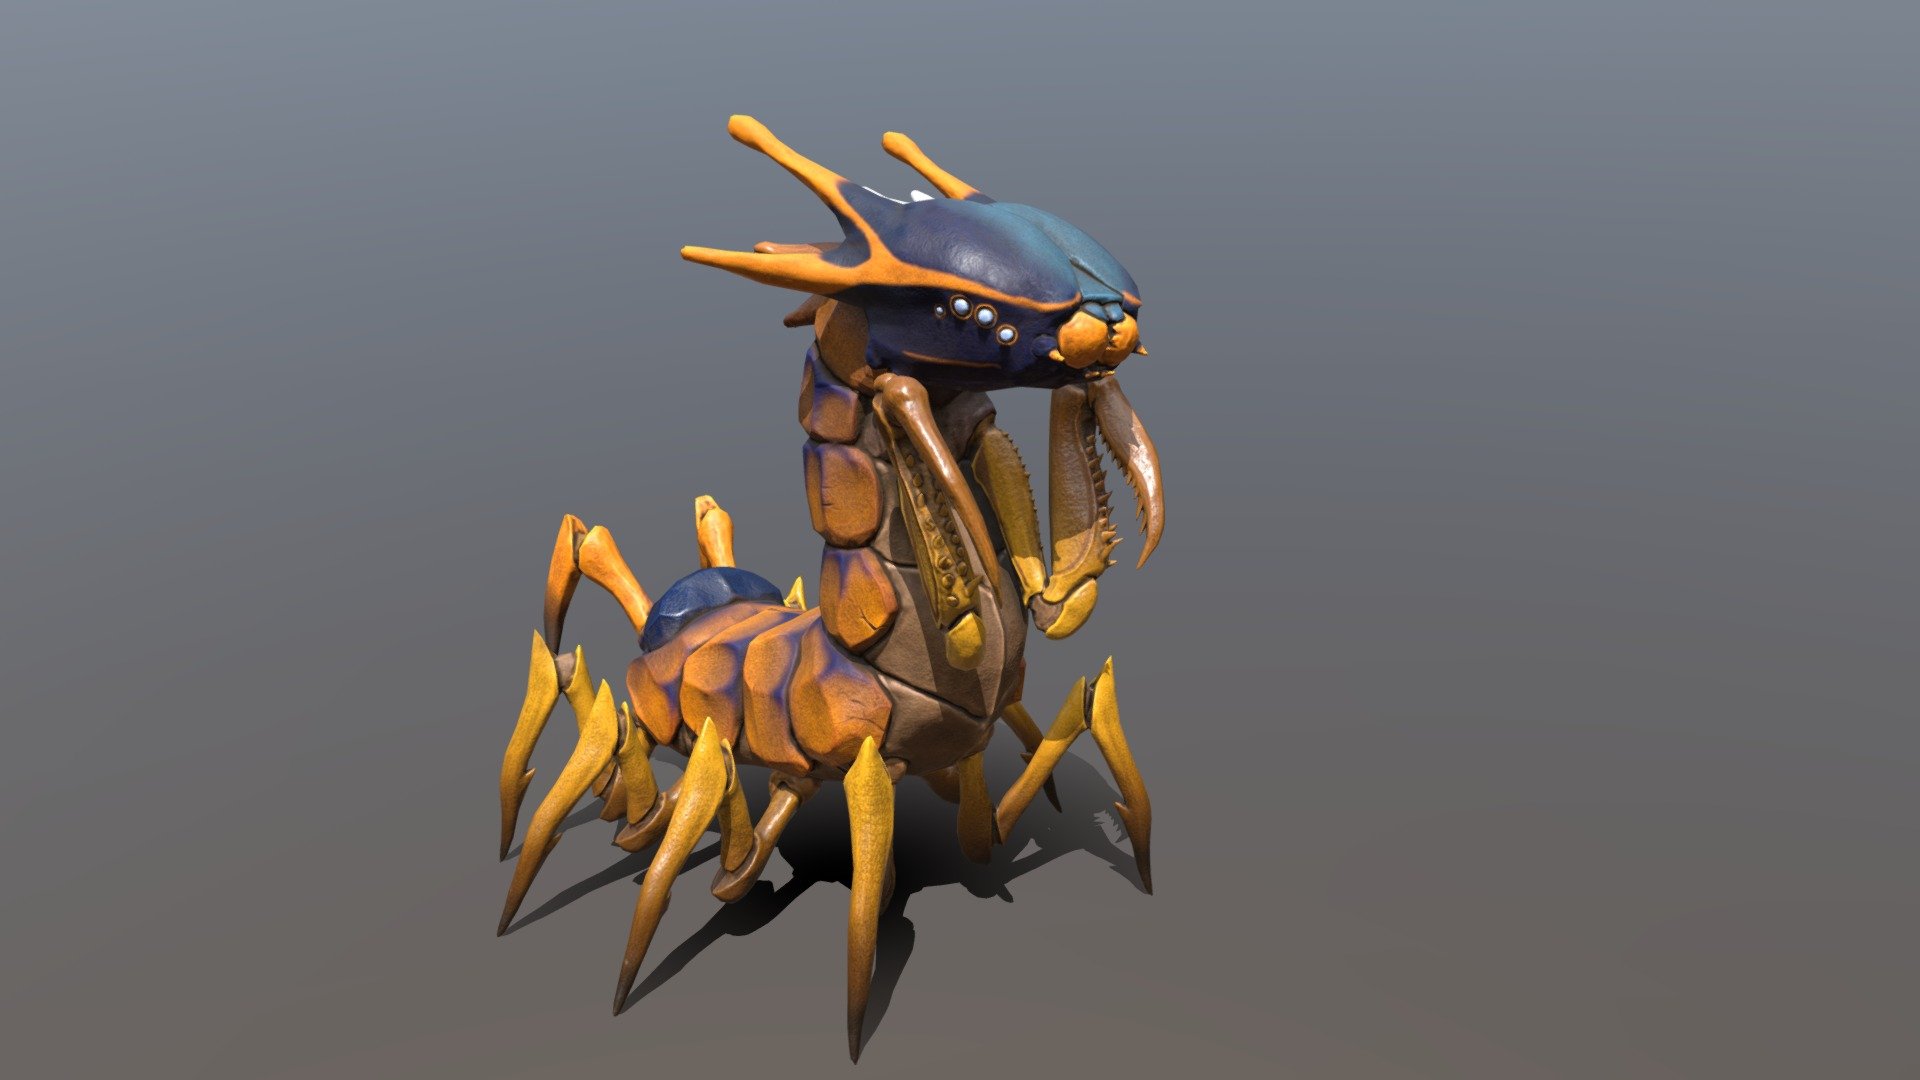 My final from my 3D modeling 2 class was to design, model, and texture a giant insect. I took the body of a Giant Centipede, the head of the Horned Emperor Caterpillar, and the upper limbs of a Praying Mantis. The high poly was created in zbrush, and the low poly is done in maya. The tri count sits at just above 20k 3d model